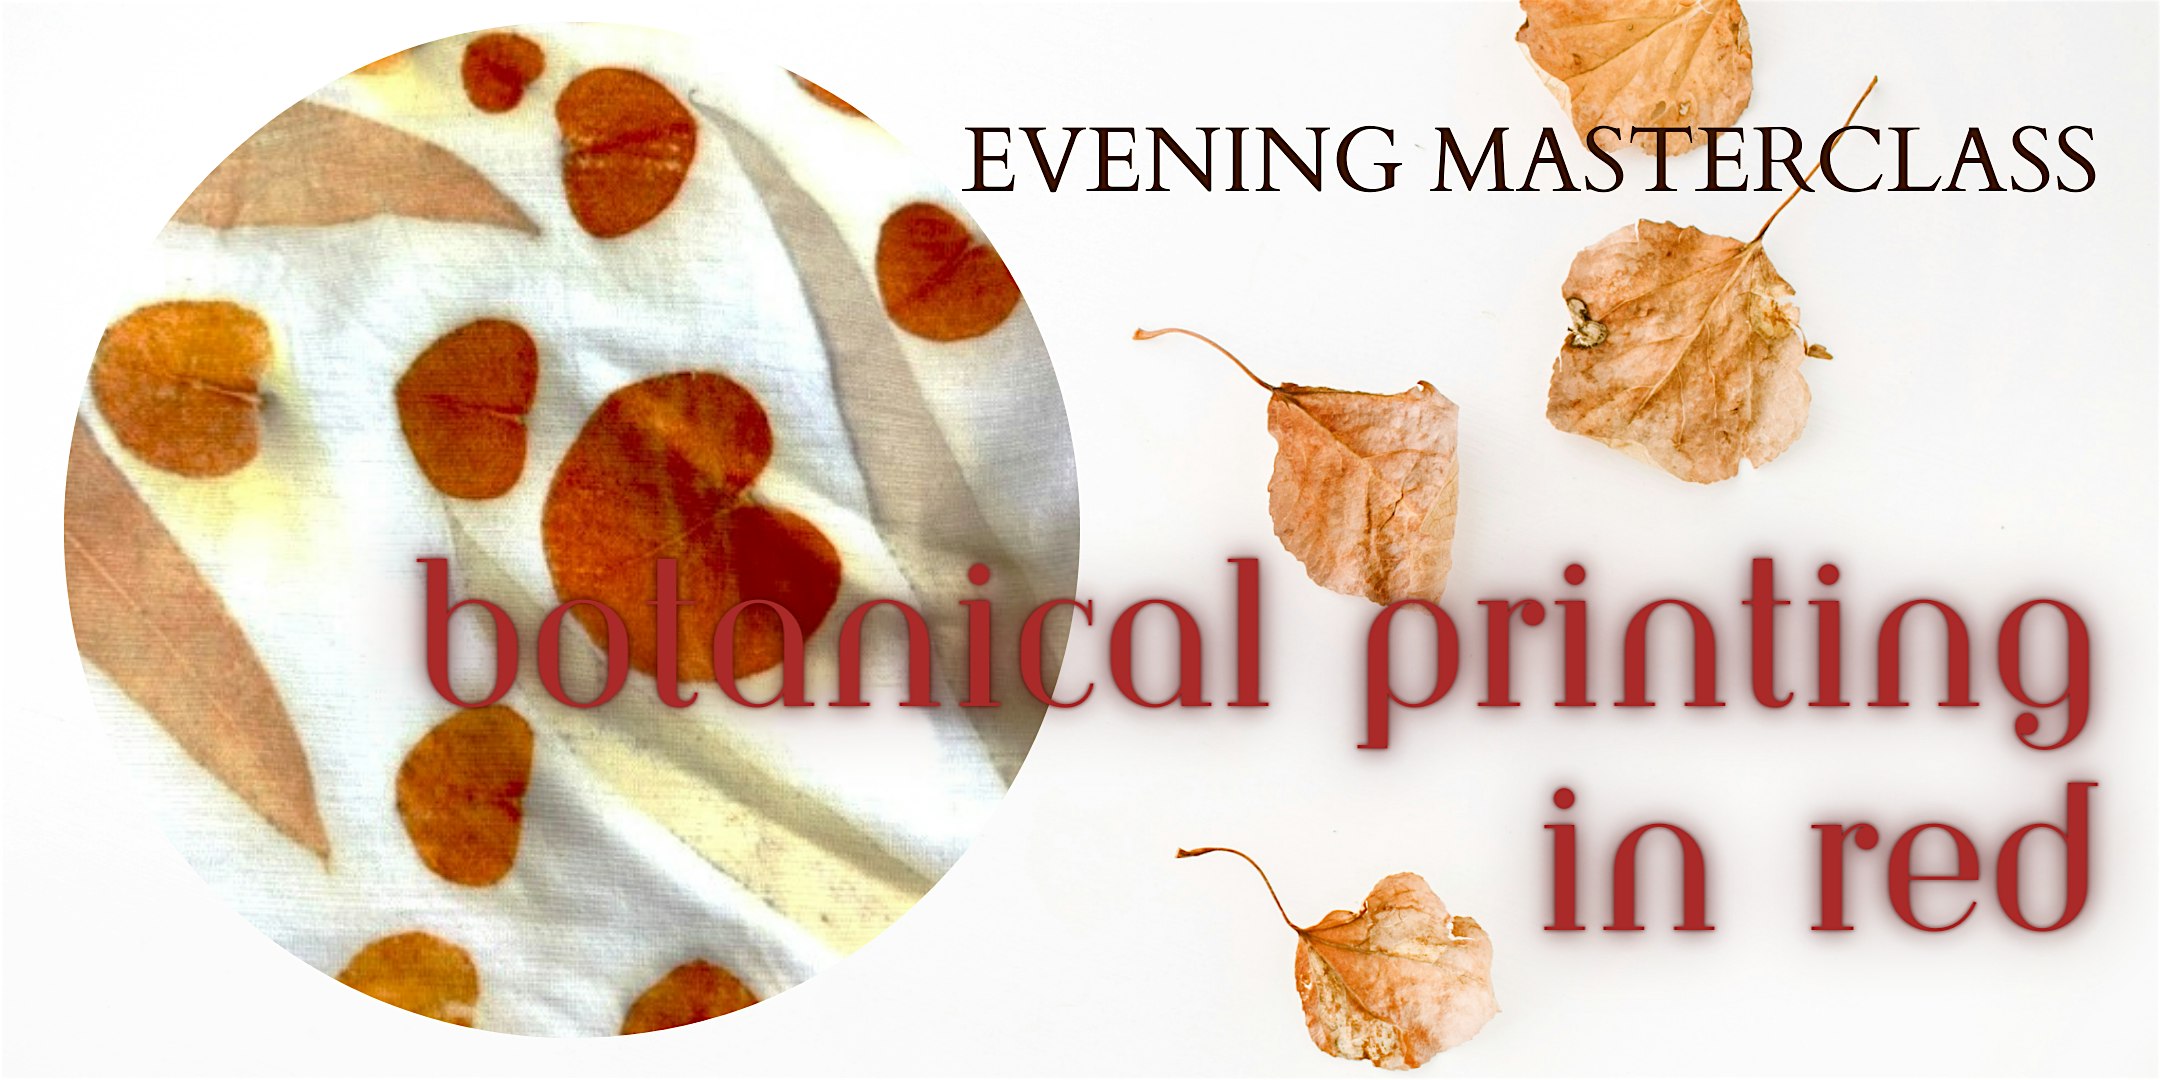 BOTANICAL PRINTING IN RED - Evening Masterclass